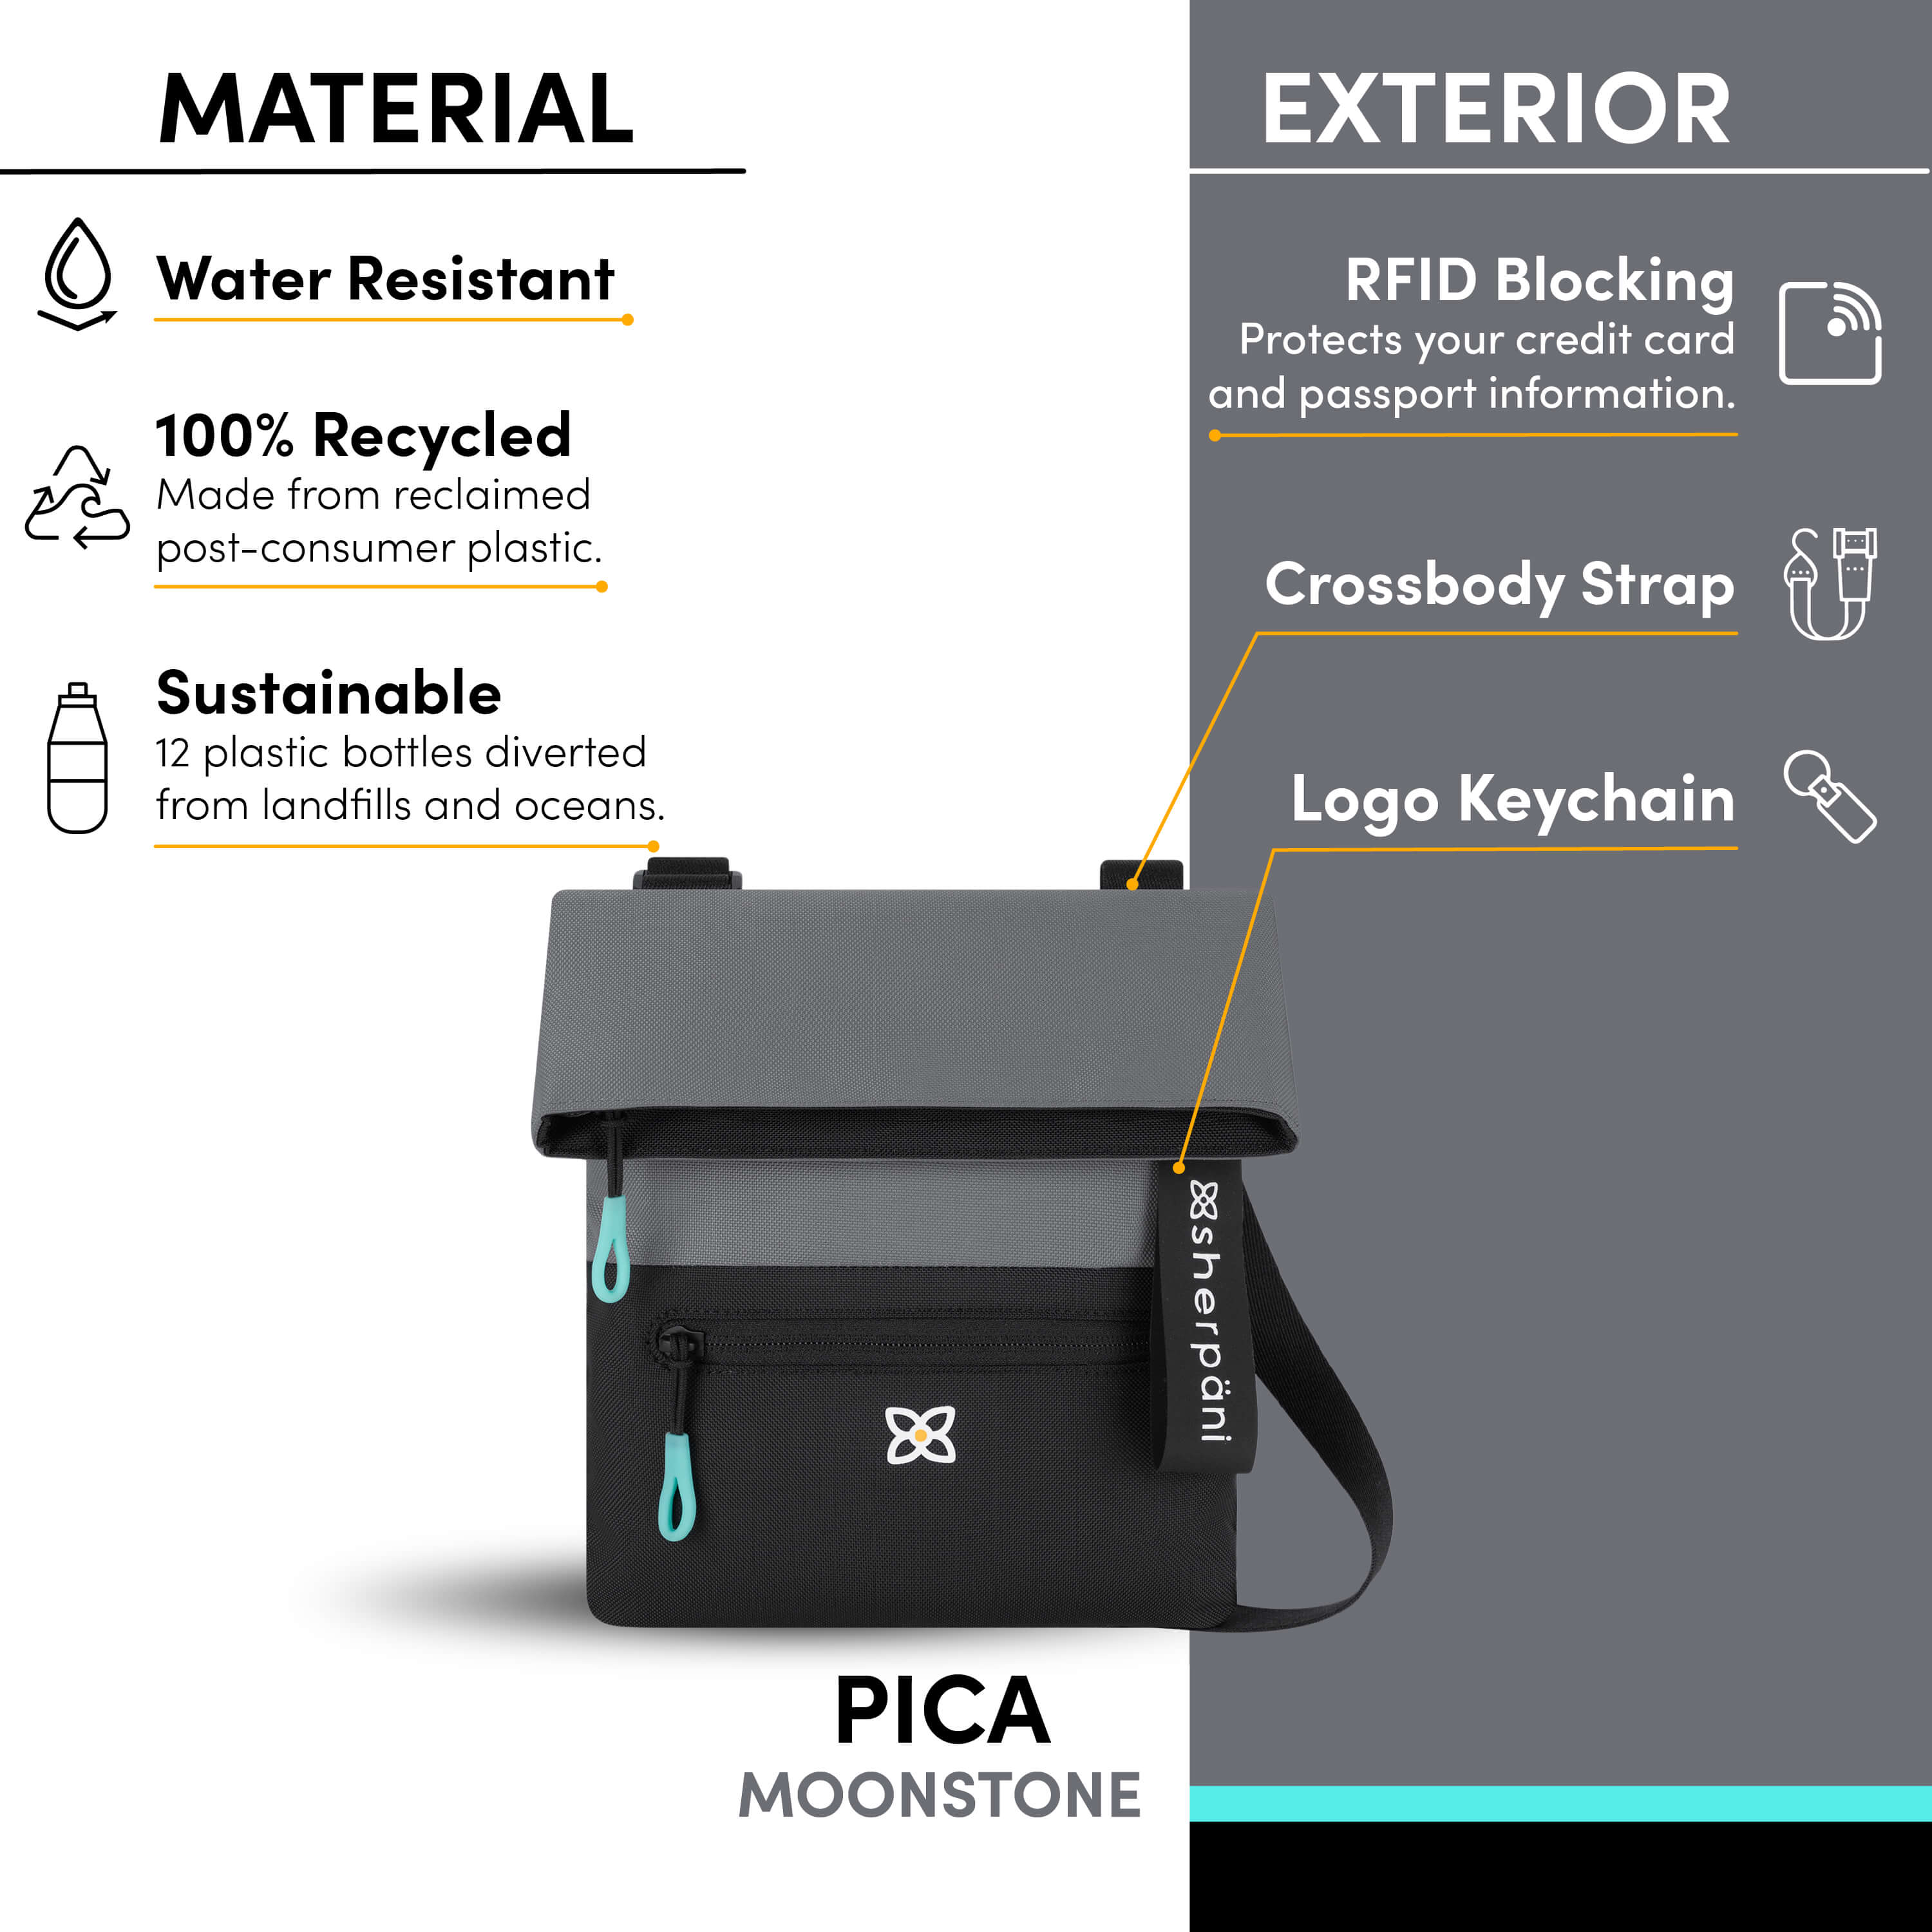 Graphic showing the features of Sherpani crossbody travel purse, the Pica. Features include water-resistant material, made from recycled materials, RFID protection, adjustable crossbody strap and Sherpani logo keychain.